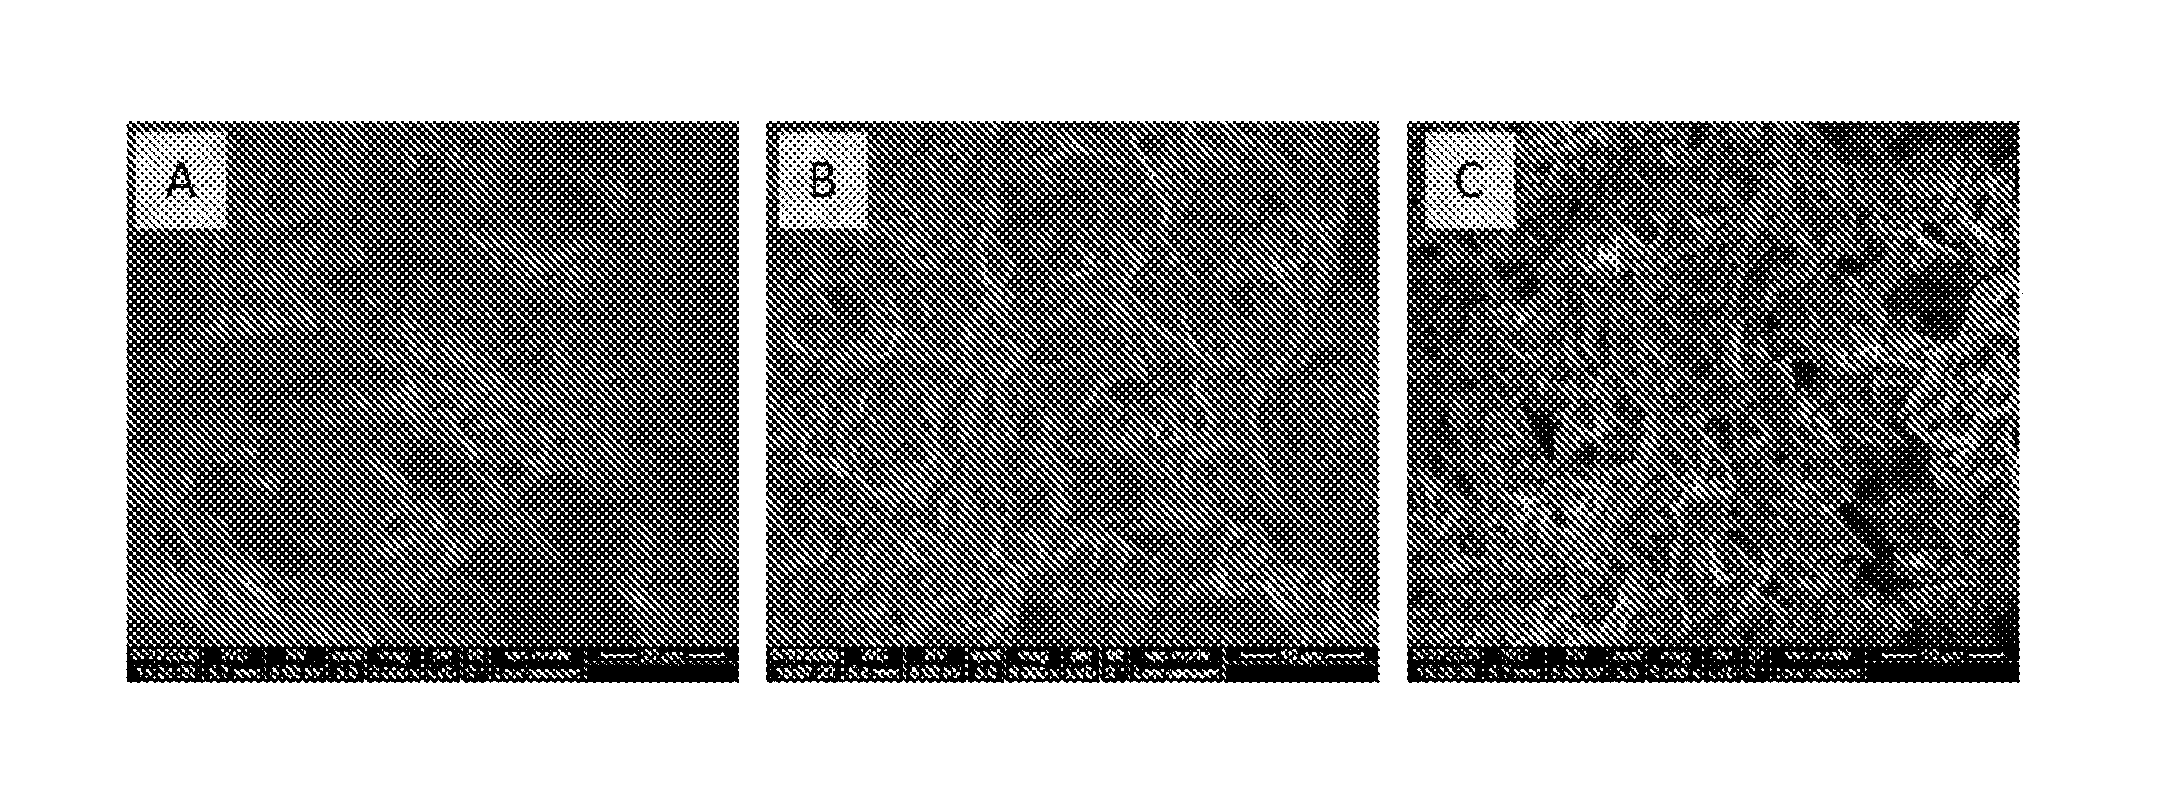 Three-dimensional nanostructured hybrid scaffold and manufacture thereof